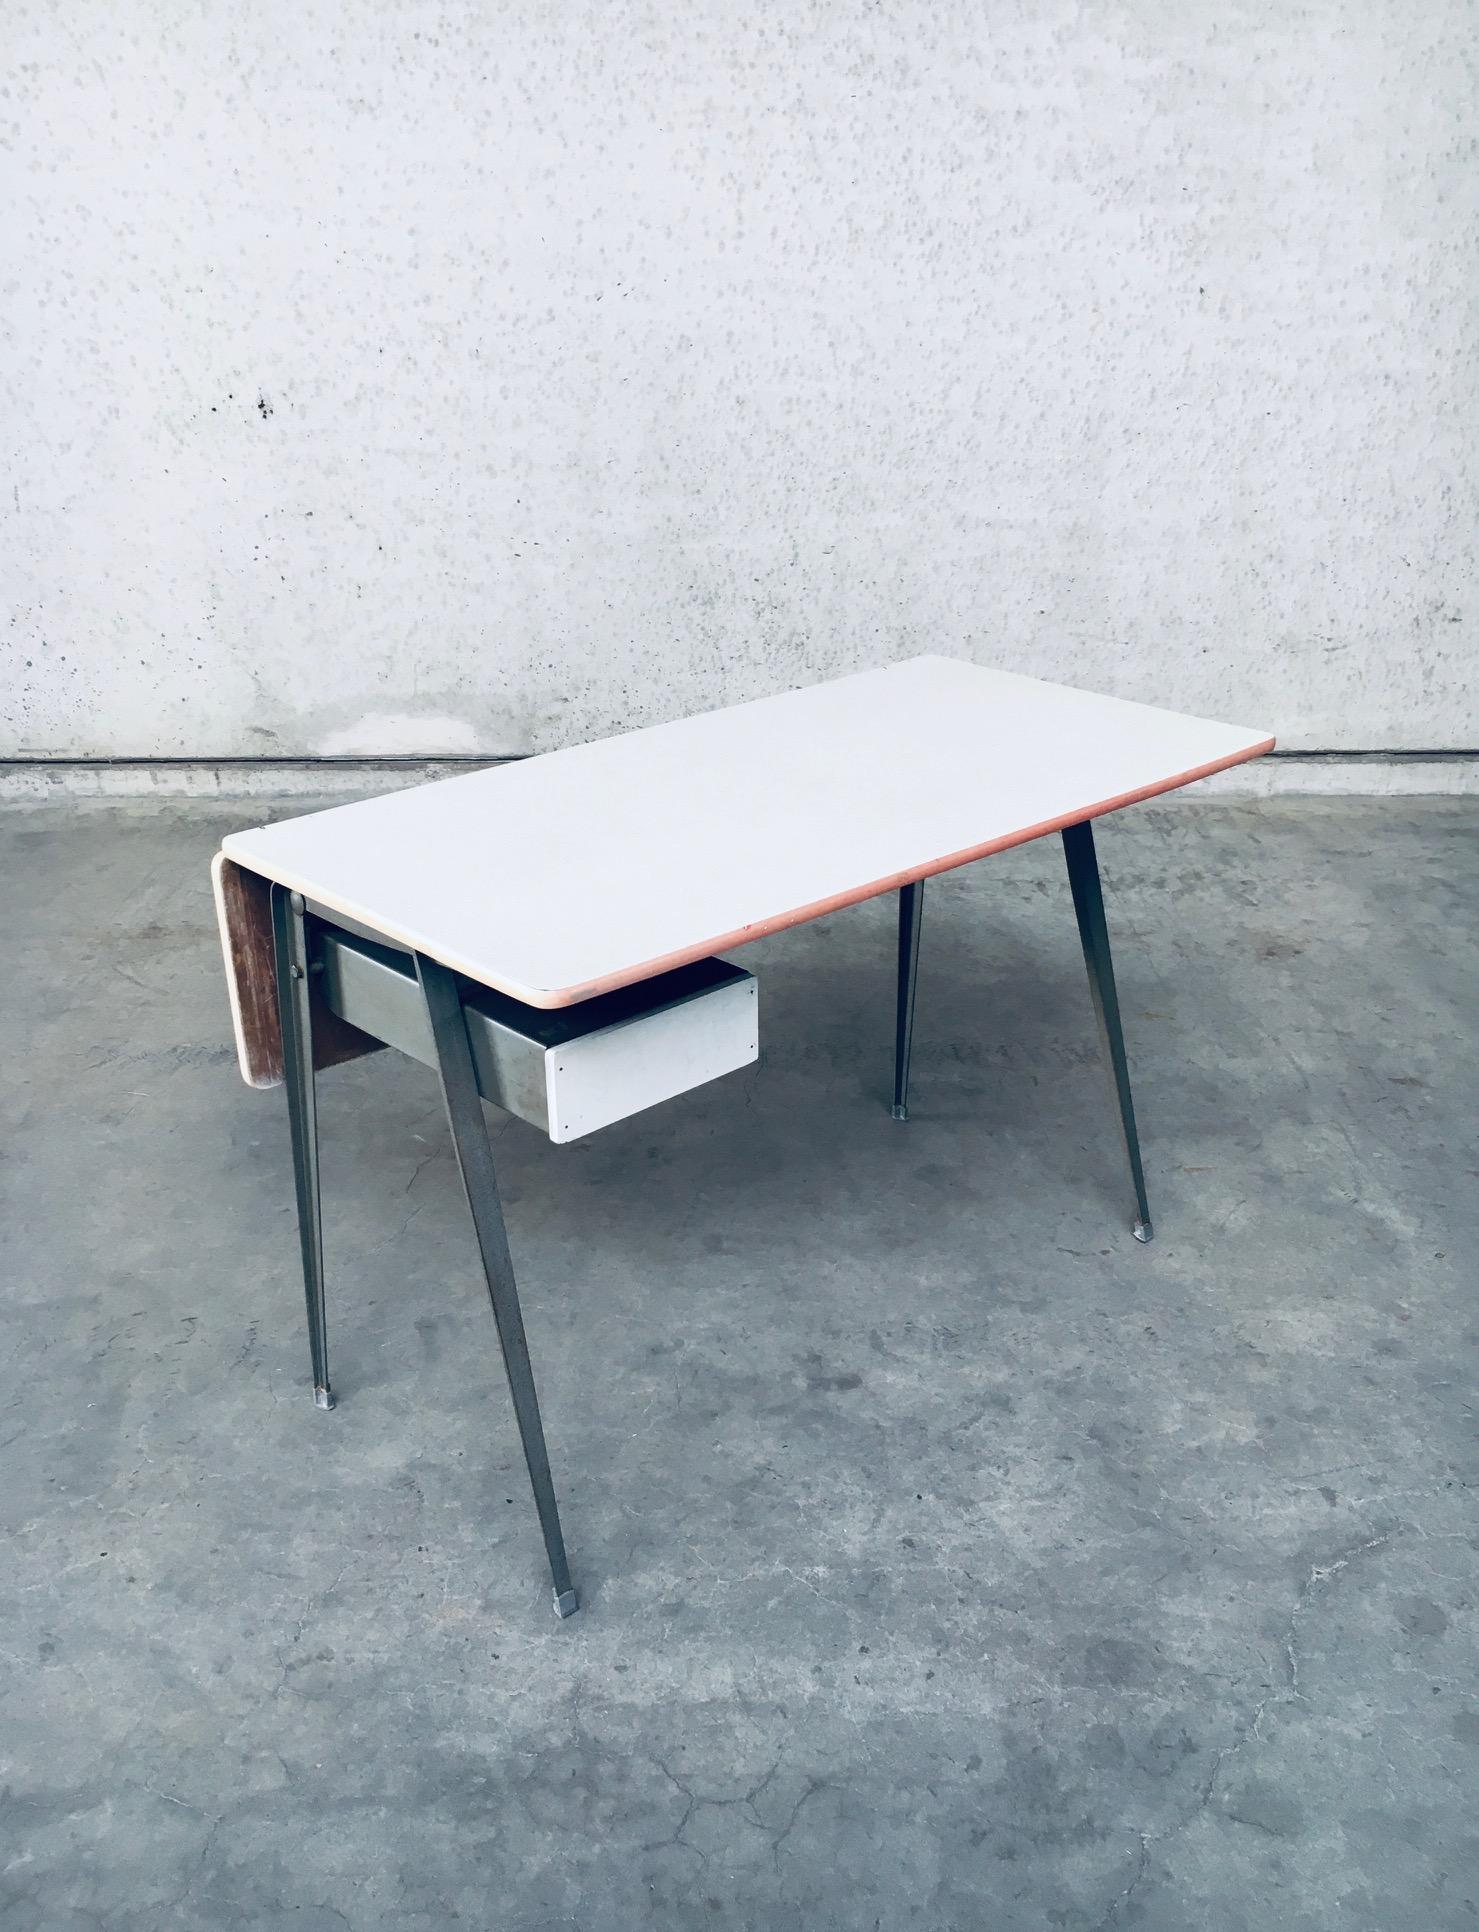 Vintage Midcentury Dutch Industrial Design Desk by Wim Rietveld and Friso Kramer for Ahrend De Cirkel. Made in the Netherlands, late 1950's, early 1960's. A RARE and hard to find design desk. Probably used in a school, hence the signs on the